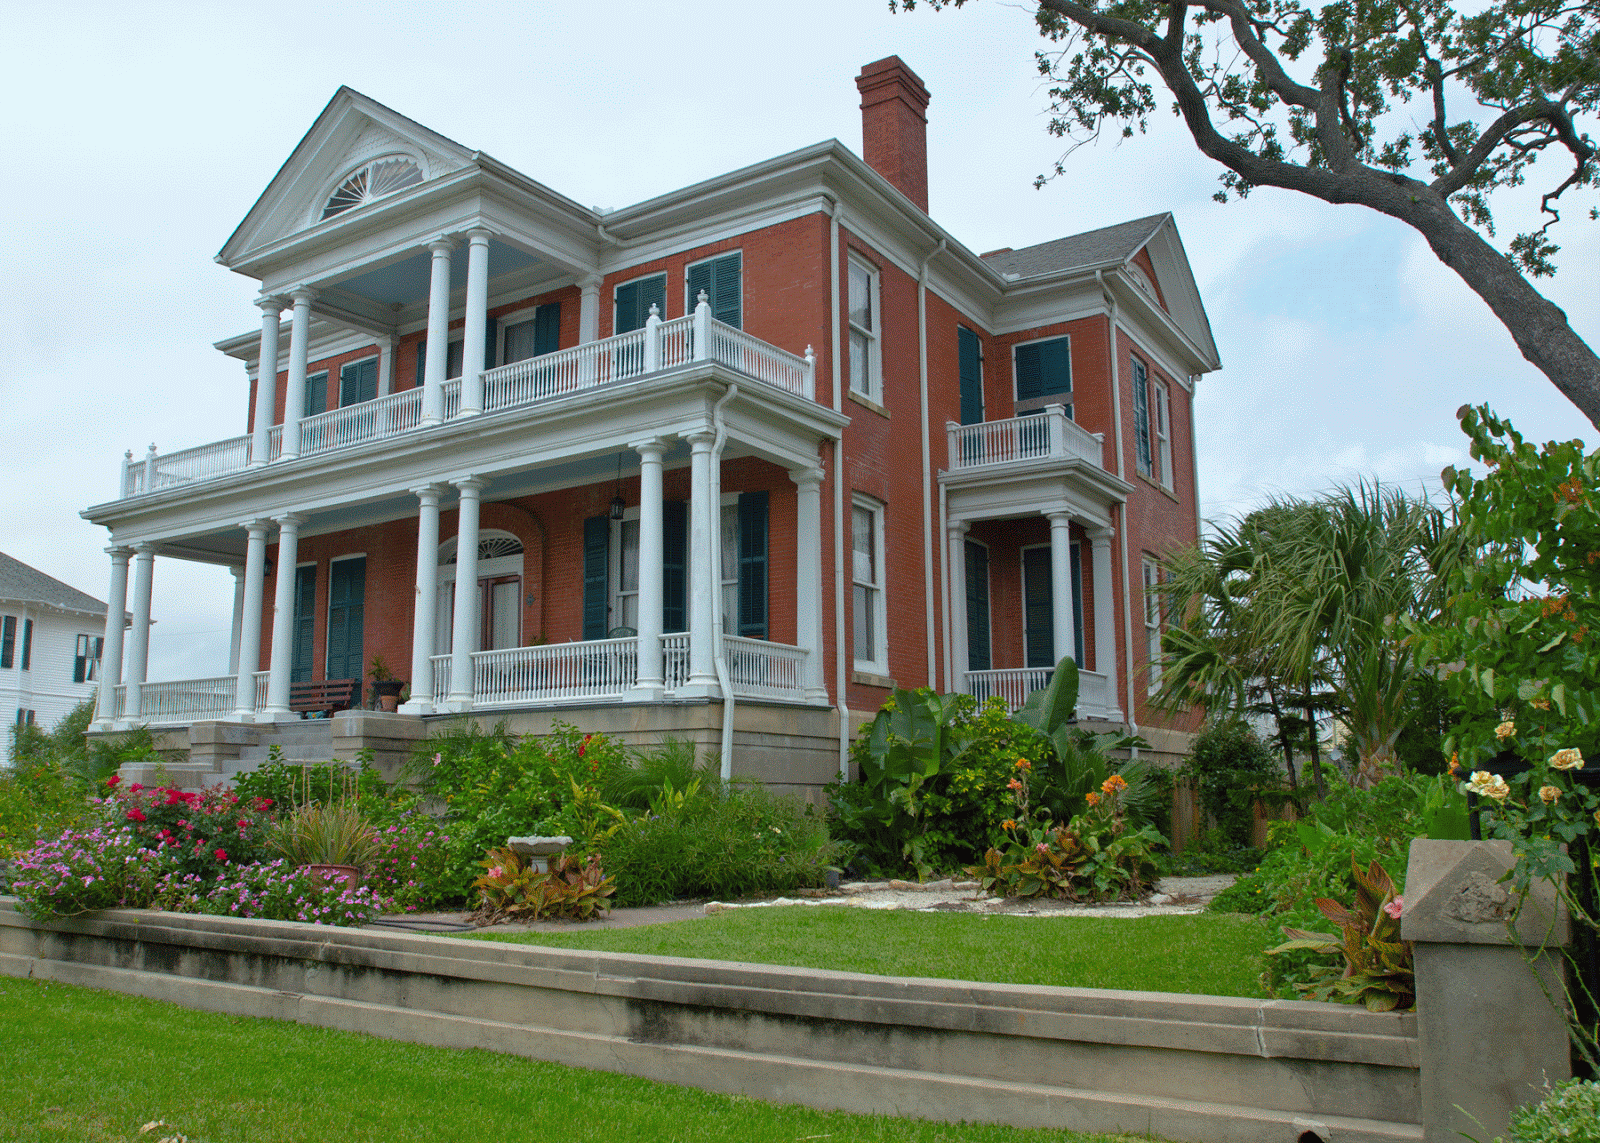 Journeys With Judy: Restored Old Homes Galveston TX